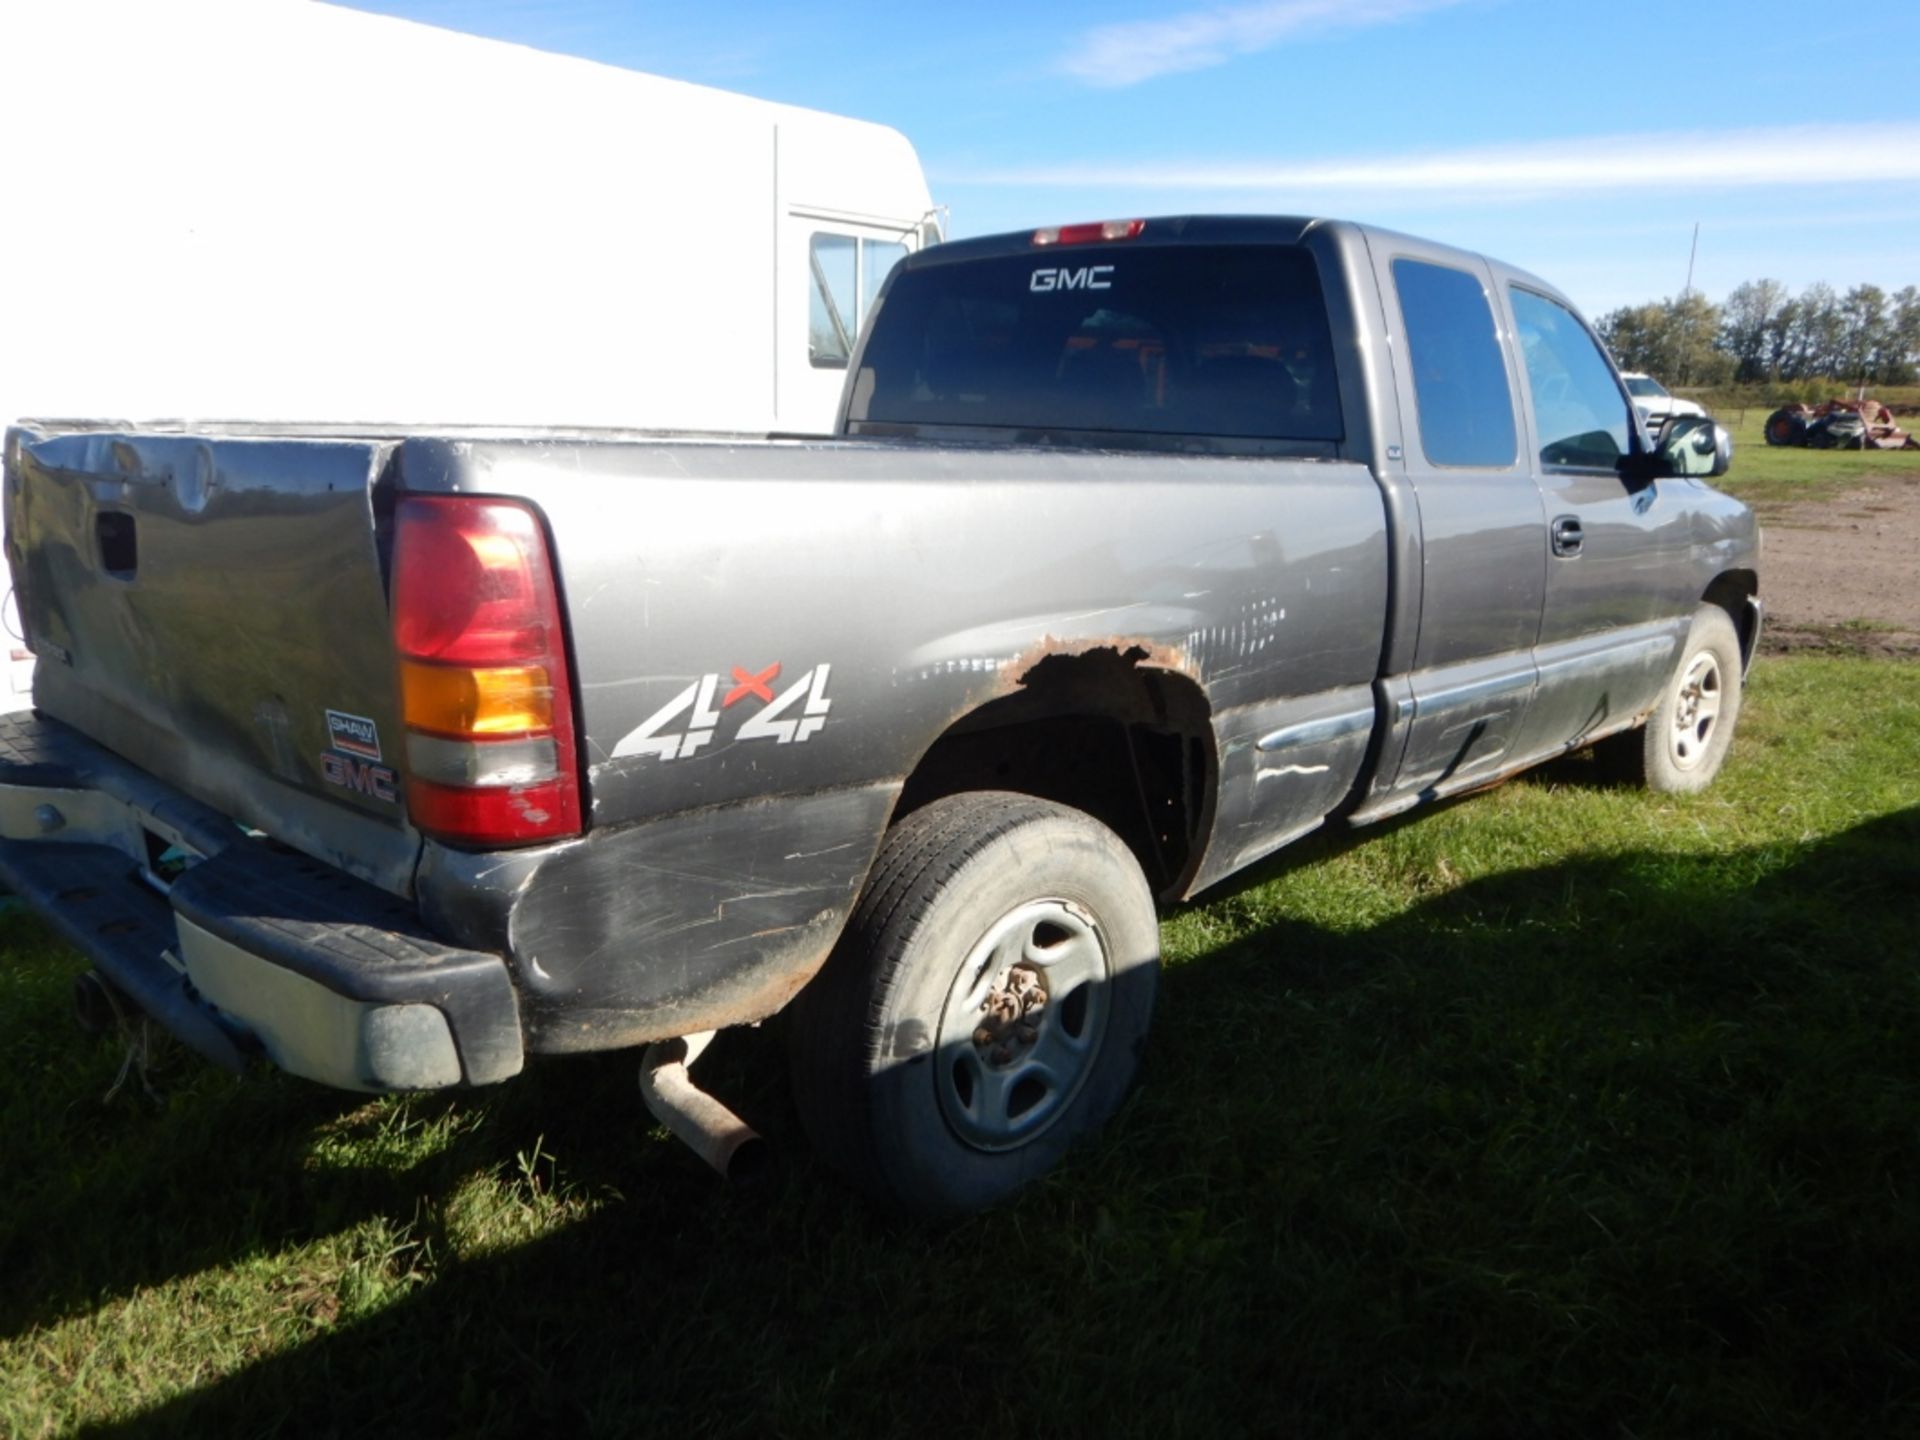 2001 GMC SIERRA TRUCK, EXT CAB, V8 GAS, AT, 4X4, S/N 2GTEK19T011258575, KM UNAVAILABLE - Image 2 of 12